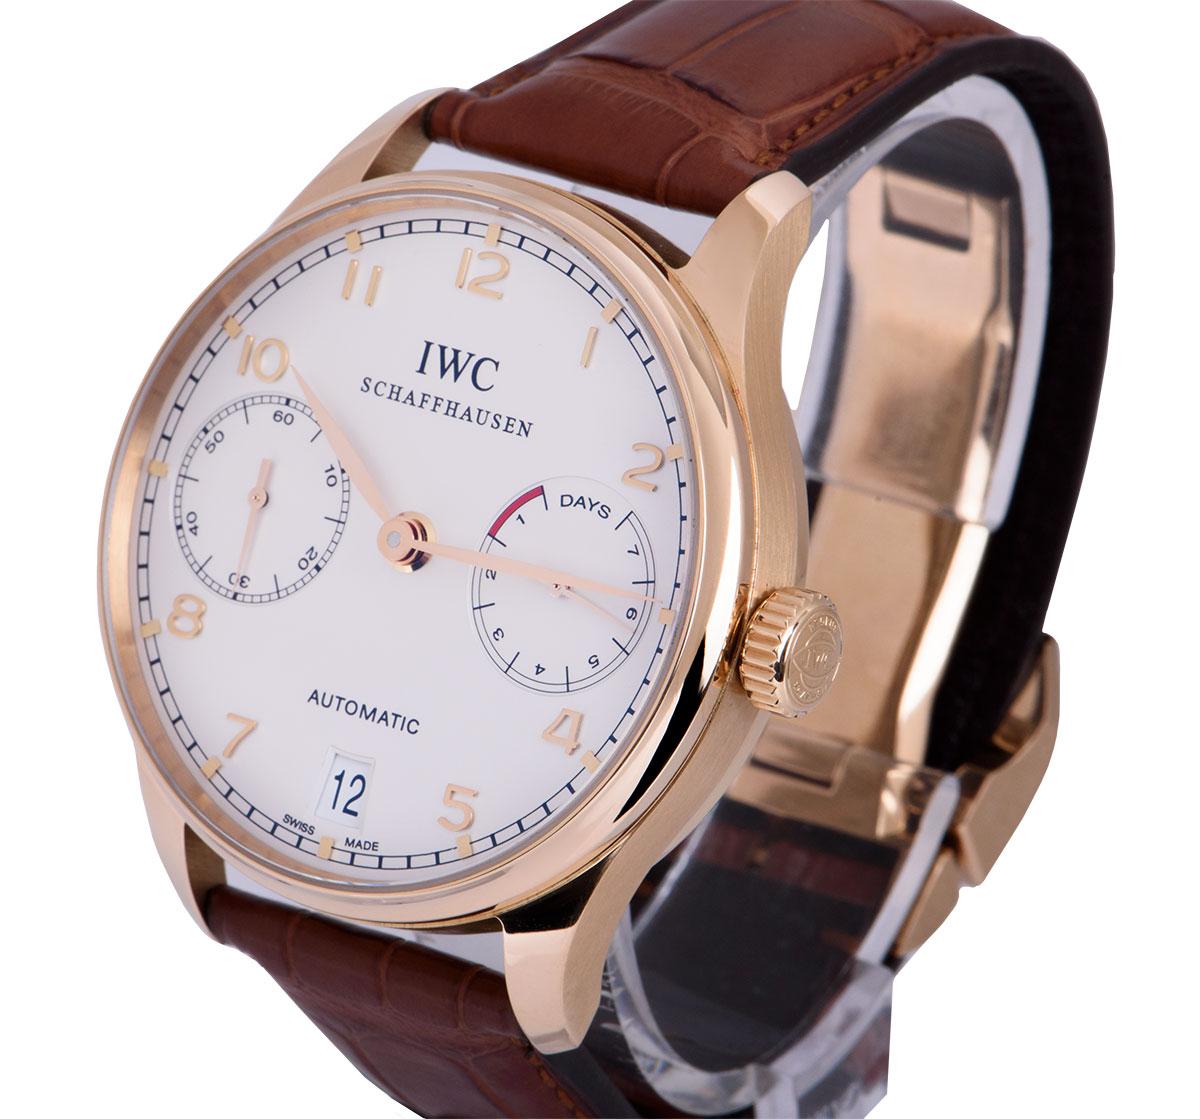 A 42.3 mm 18k Rose Gold Portuguese 7 Day Gents Wristwatch, silver dial with applied arabic numbers, 7 day power reserve indicator at 3 0'clock, date at 6 0'clock, small seconds at 9 0'clock, a fixed 18k rose gold bezel, an original brown leather